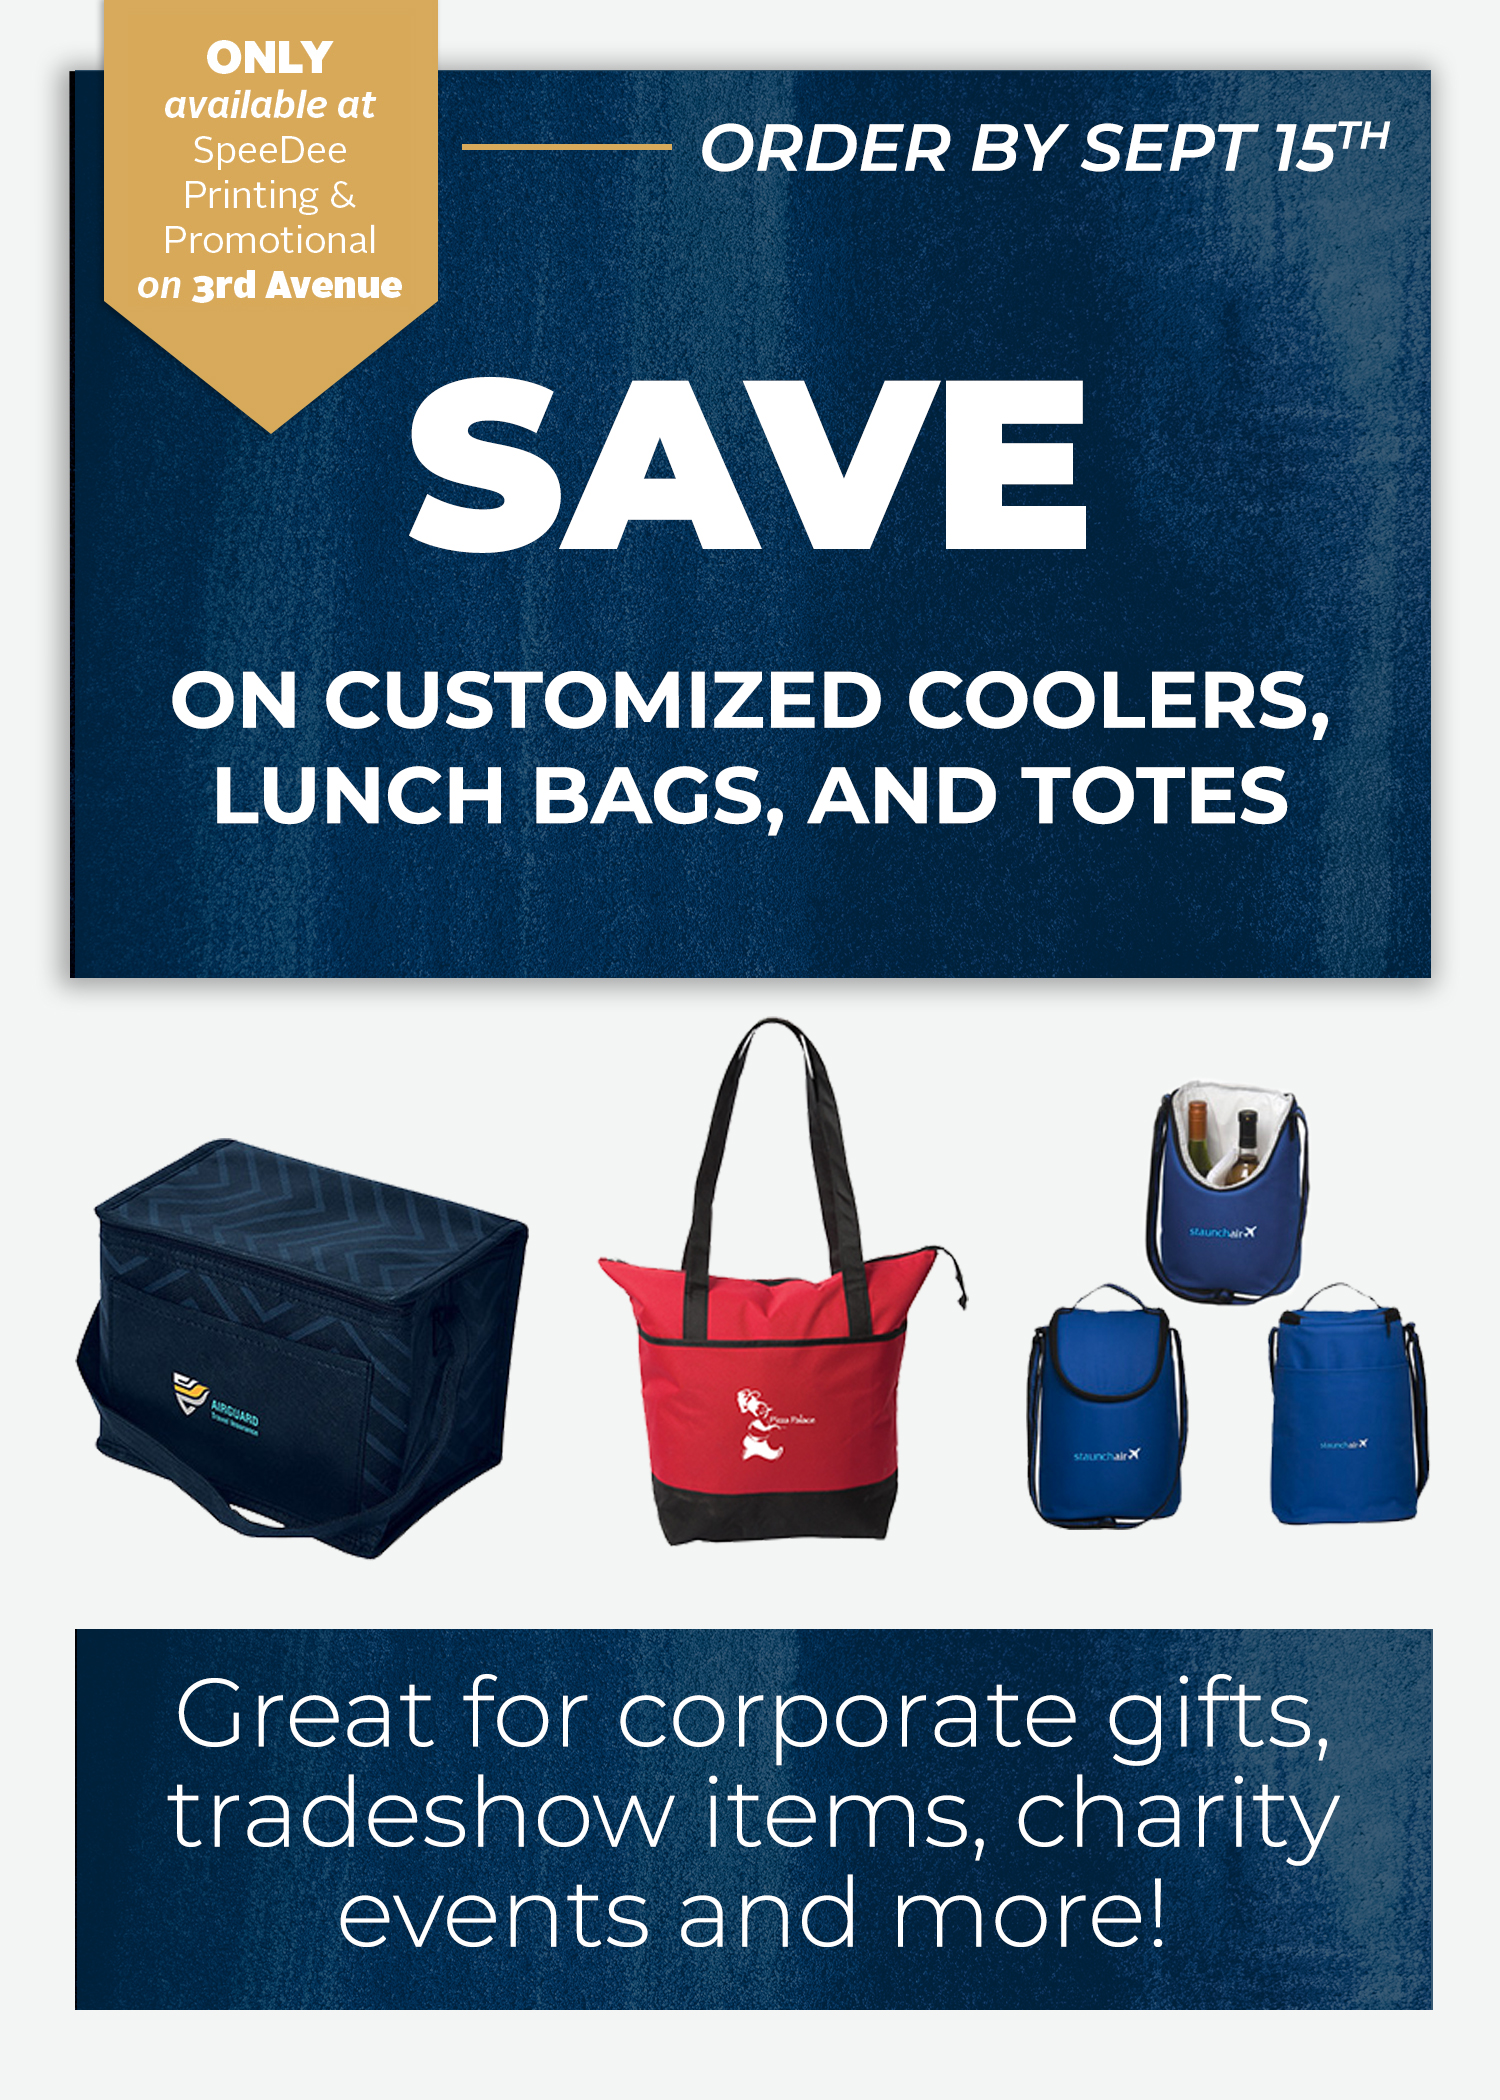 Speedee Printing and Promotional flyer reading save on customized coolers, lunch bags, and totes